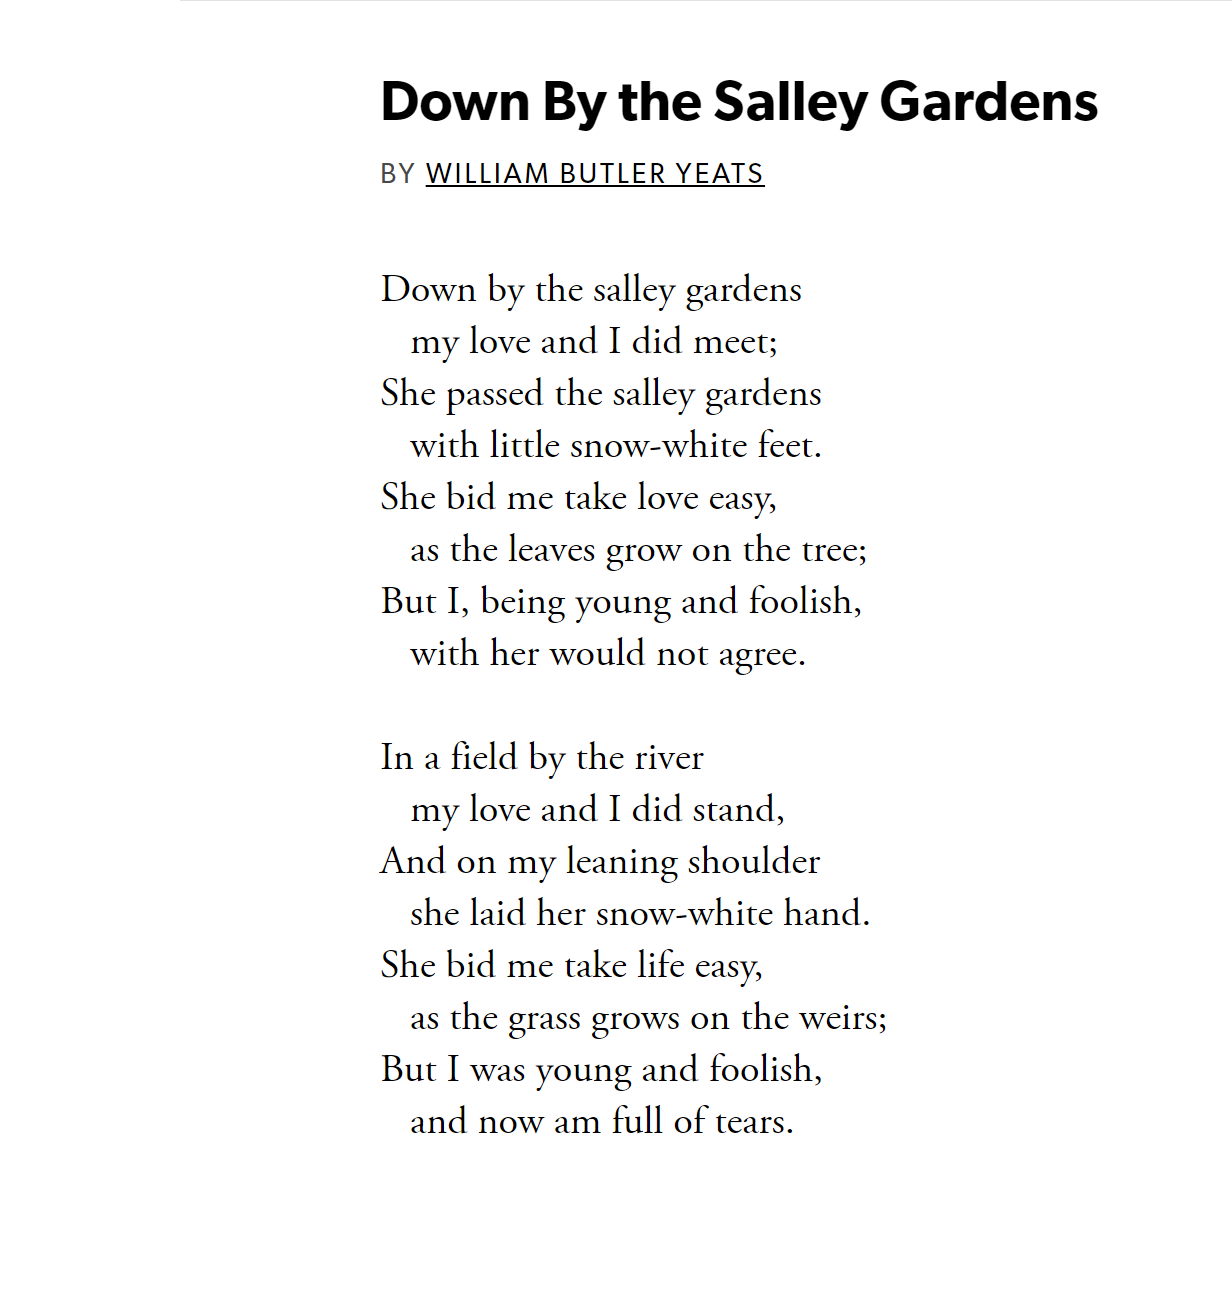 down by the salley gardens by Yeats